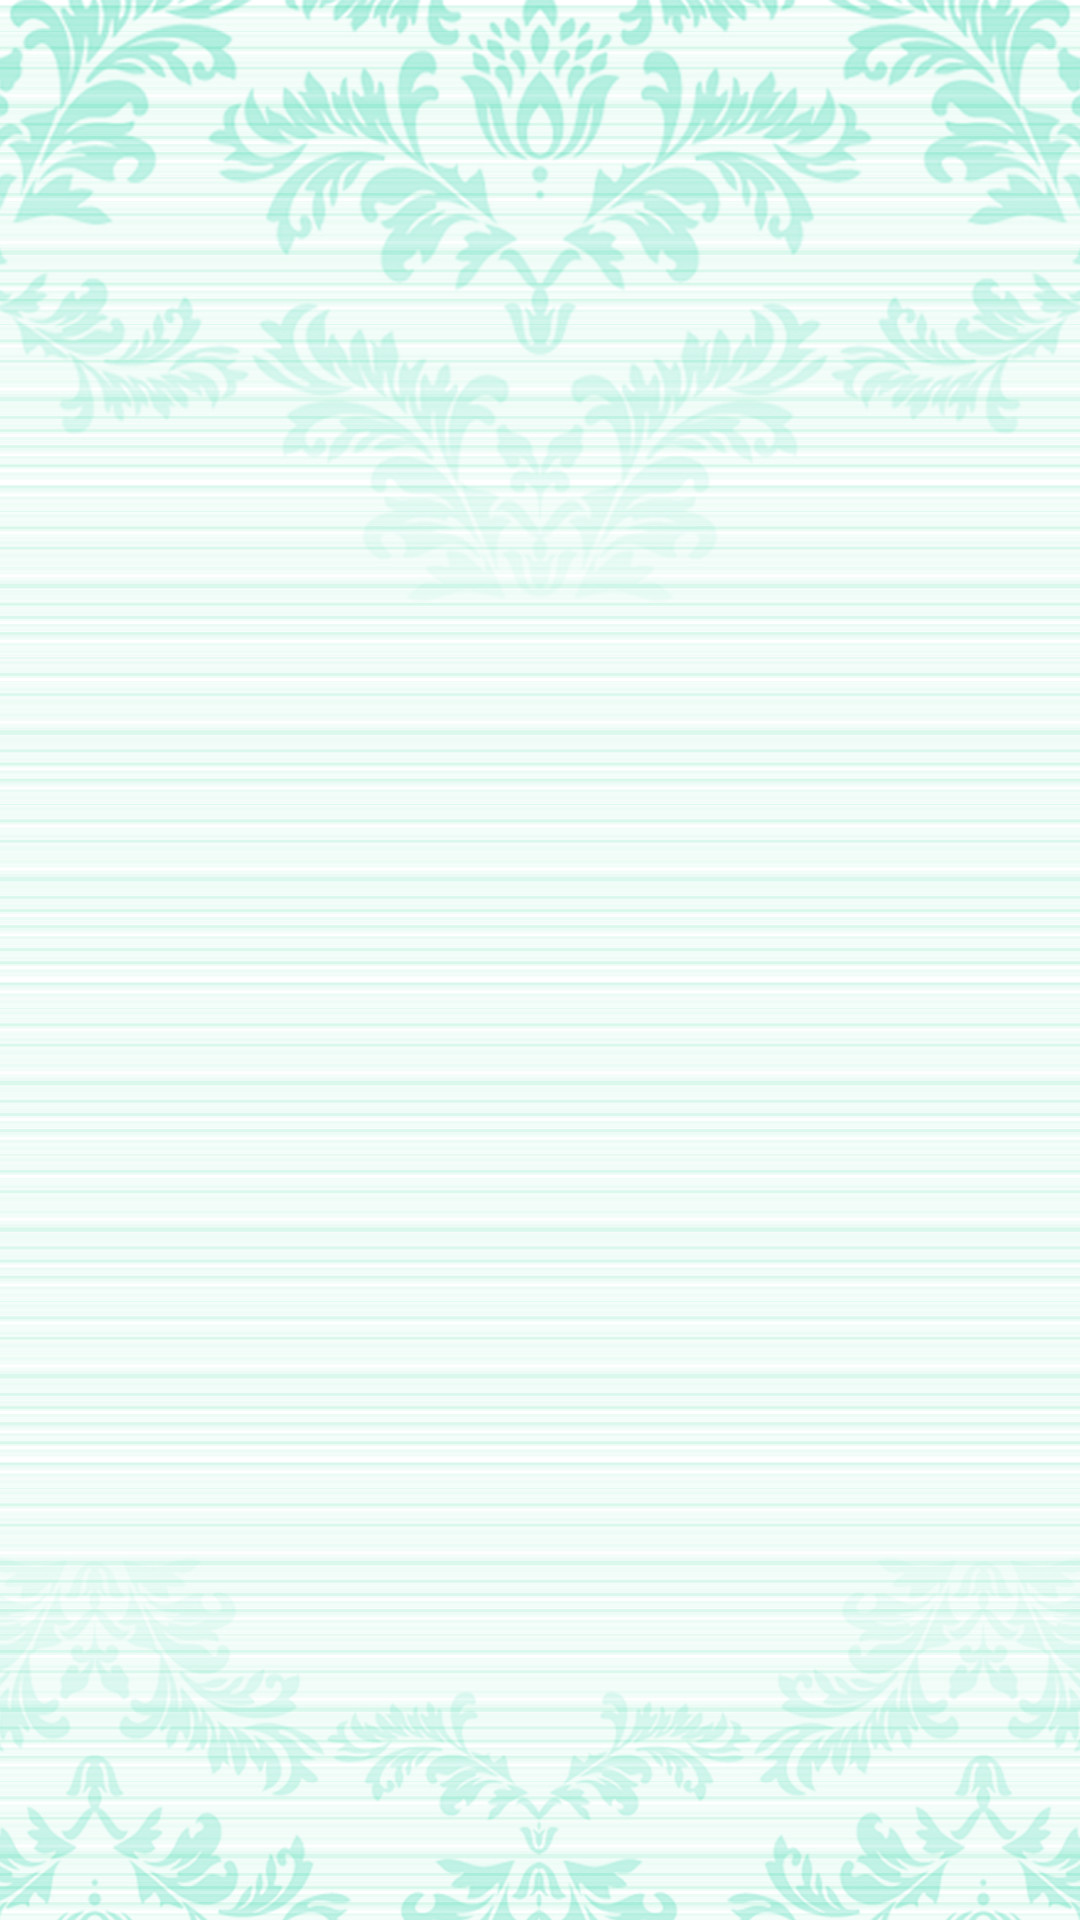 1080x1920 Pastel mint green ombre damask frame iPhone phone lock screen wallpaper  background